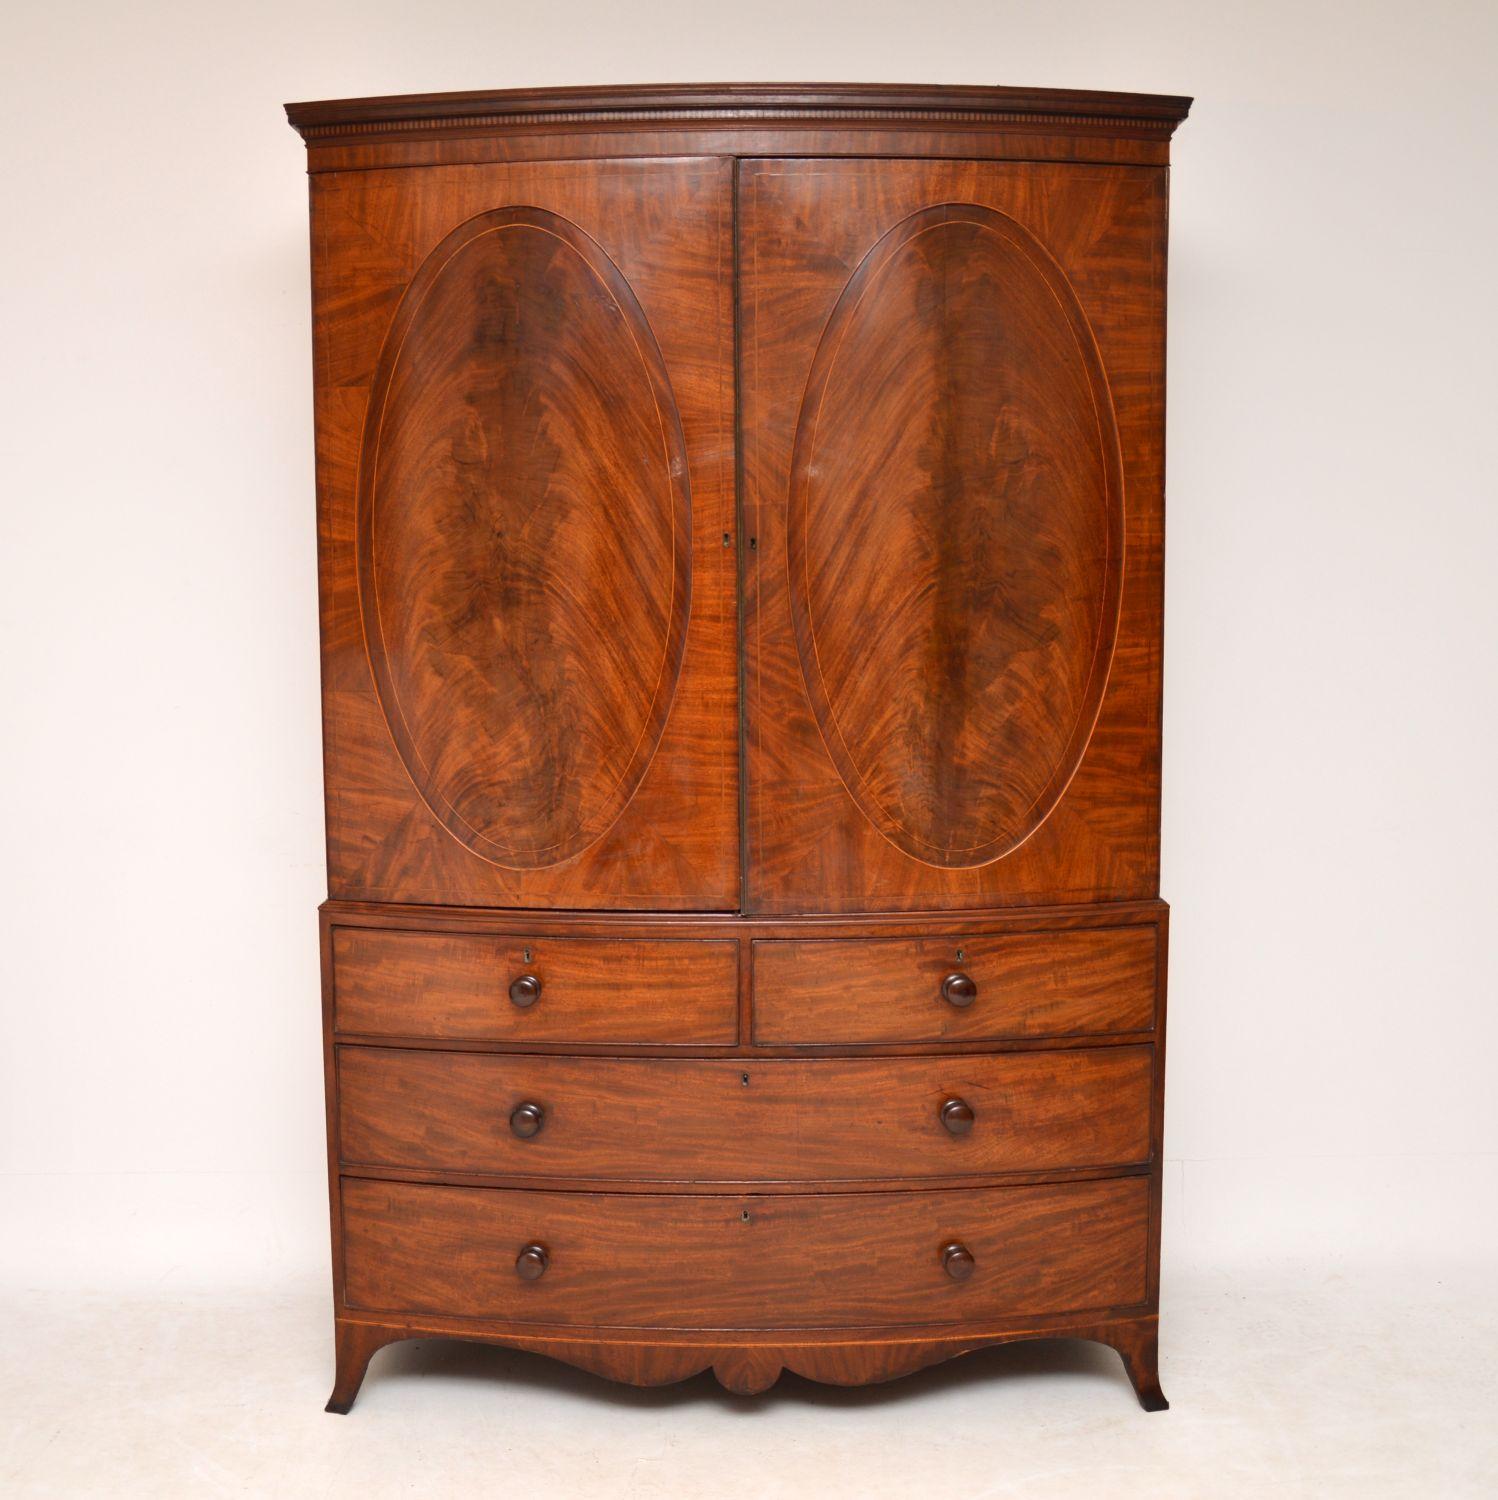 Very impressive antique George III mahogany linen press dating from circa 1800 period and in very good condition. It’s bow fronted, with oval flame mahogany panels on the top cupboards and it still has the original brass beading on the door. There